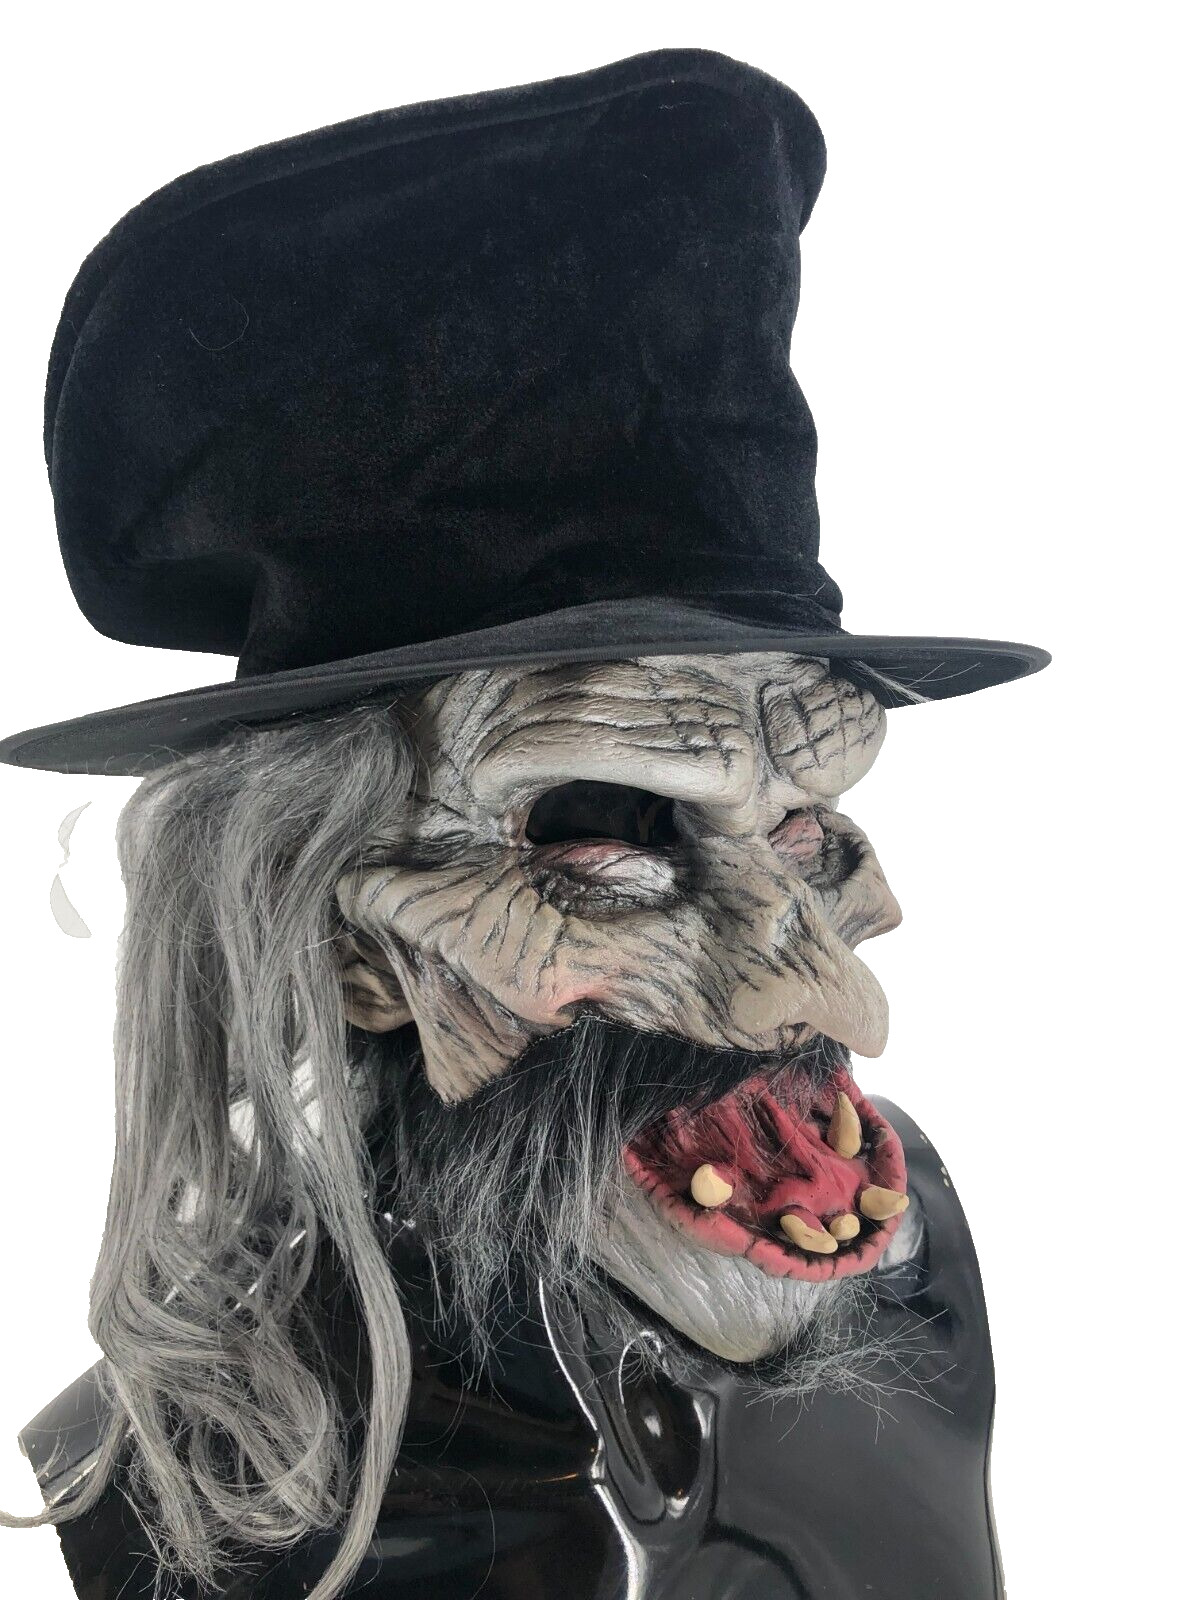 Ring Master Undead Zombie Adult Halloween Latex Mask & Top Hat